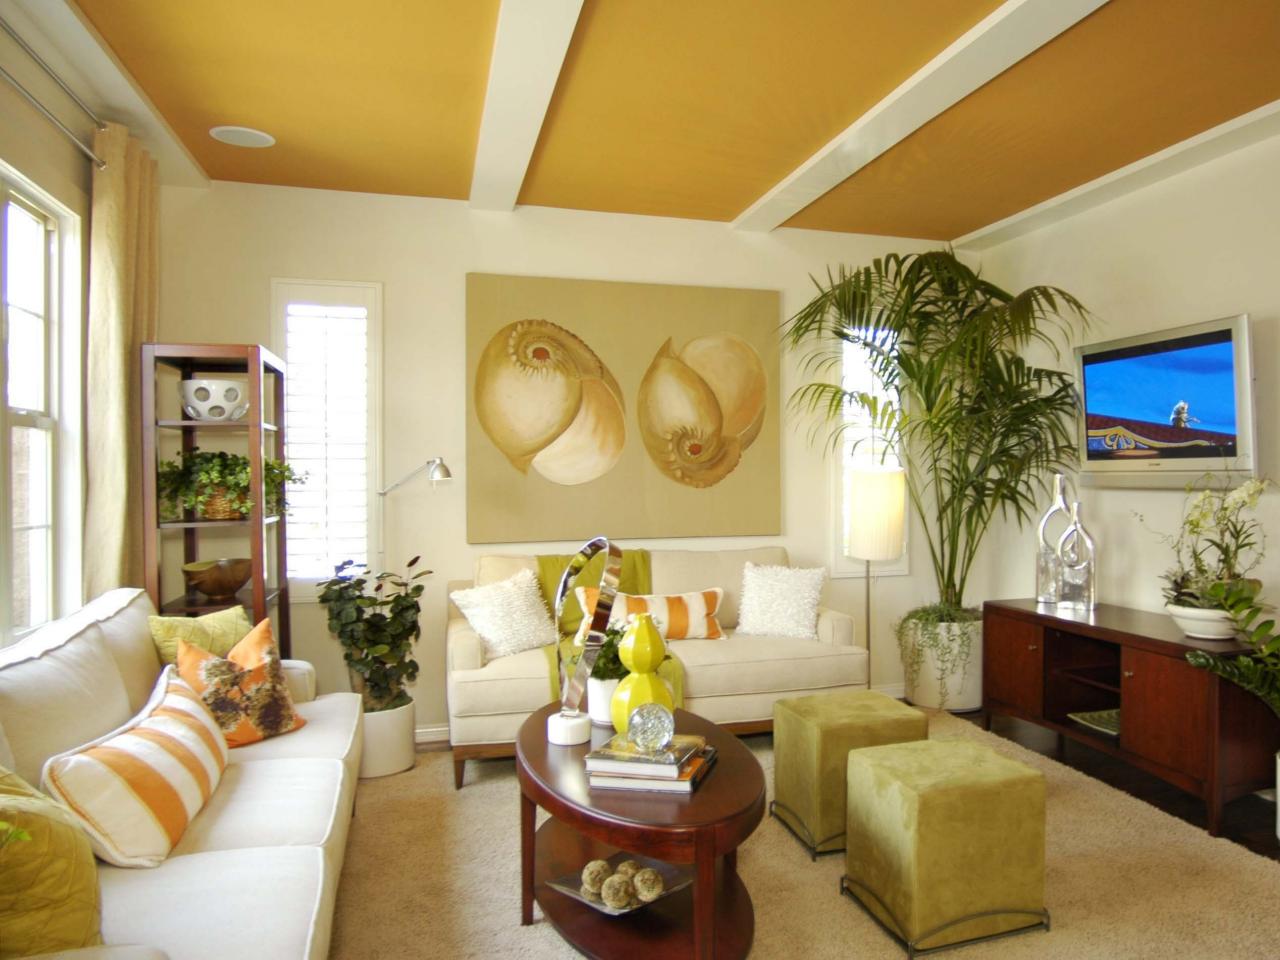 25 Different Types of Ceilings   Add Character to a Boring Ceiling ...